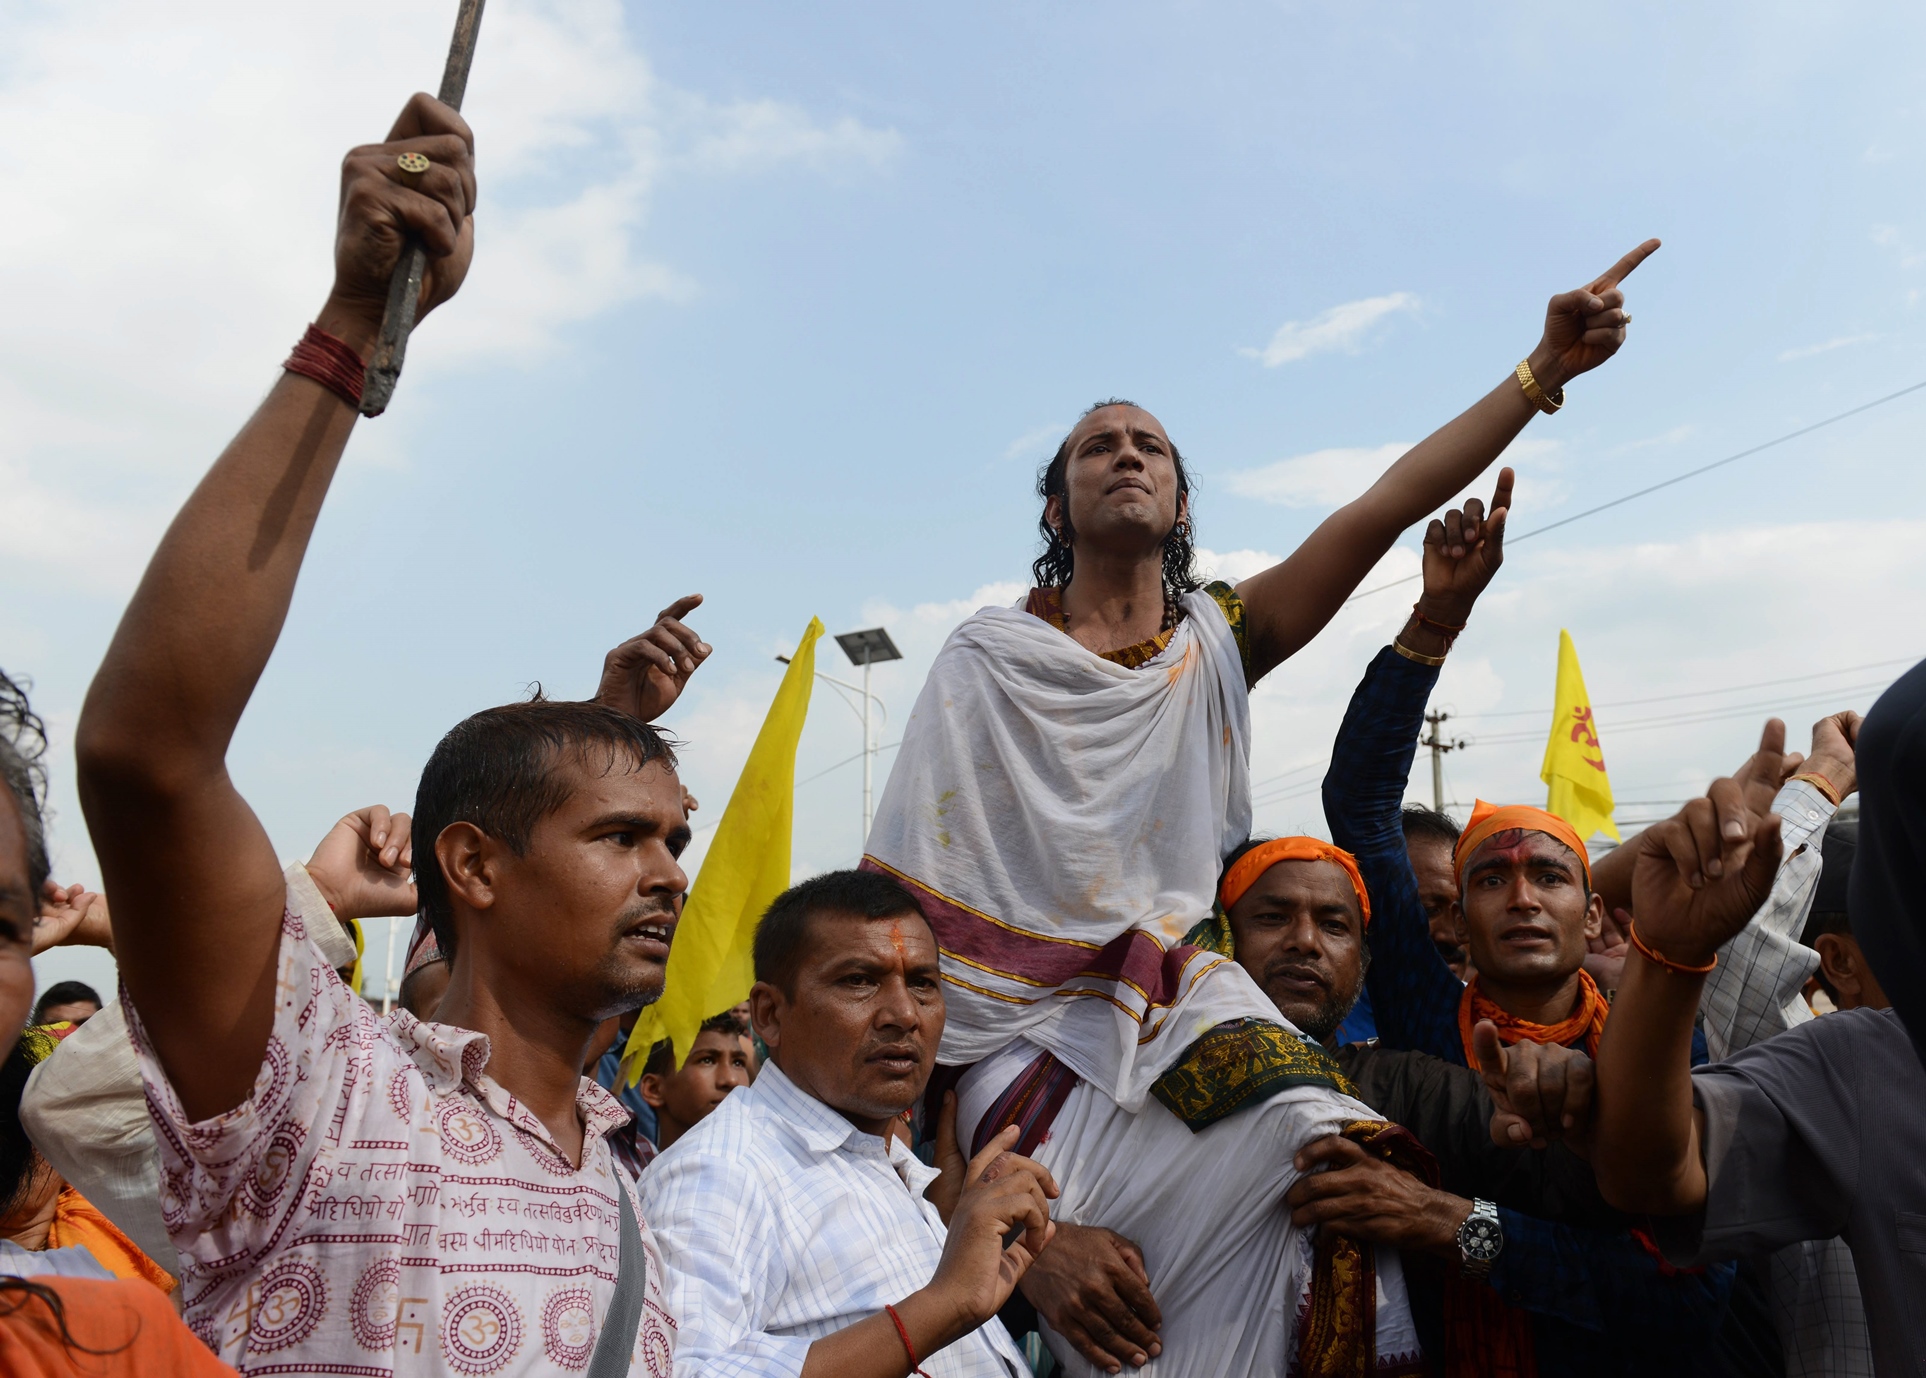 nepalese activist chants slogans during a protest demanding nepal be declared a hindu state in kathmandu on september 1 2015 photo afp